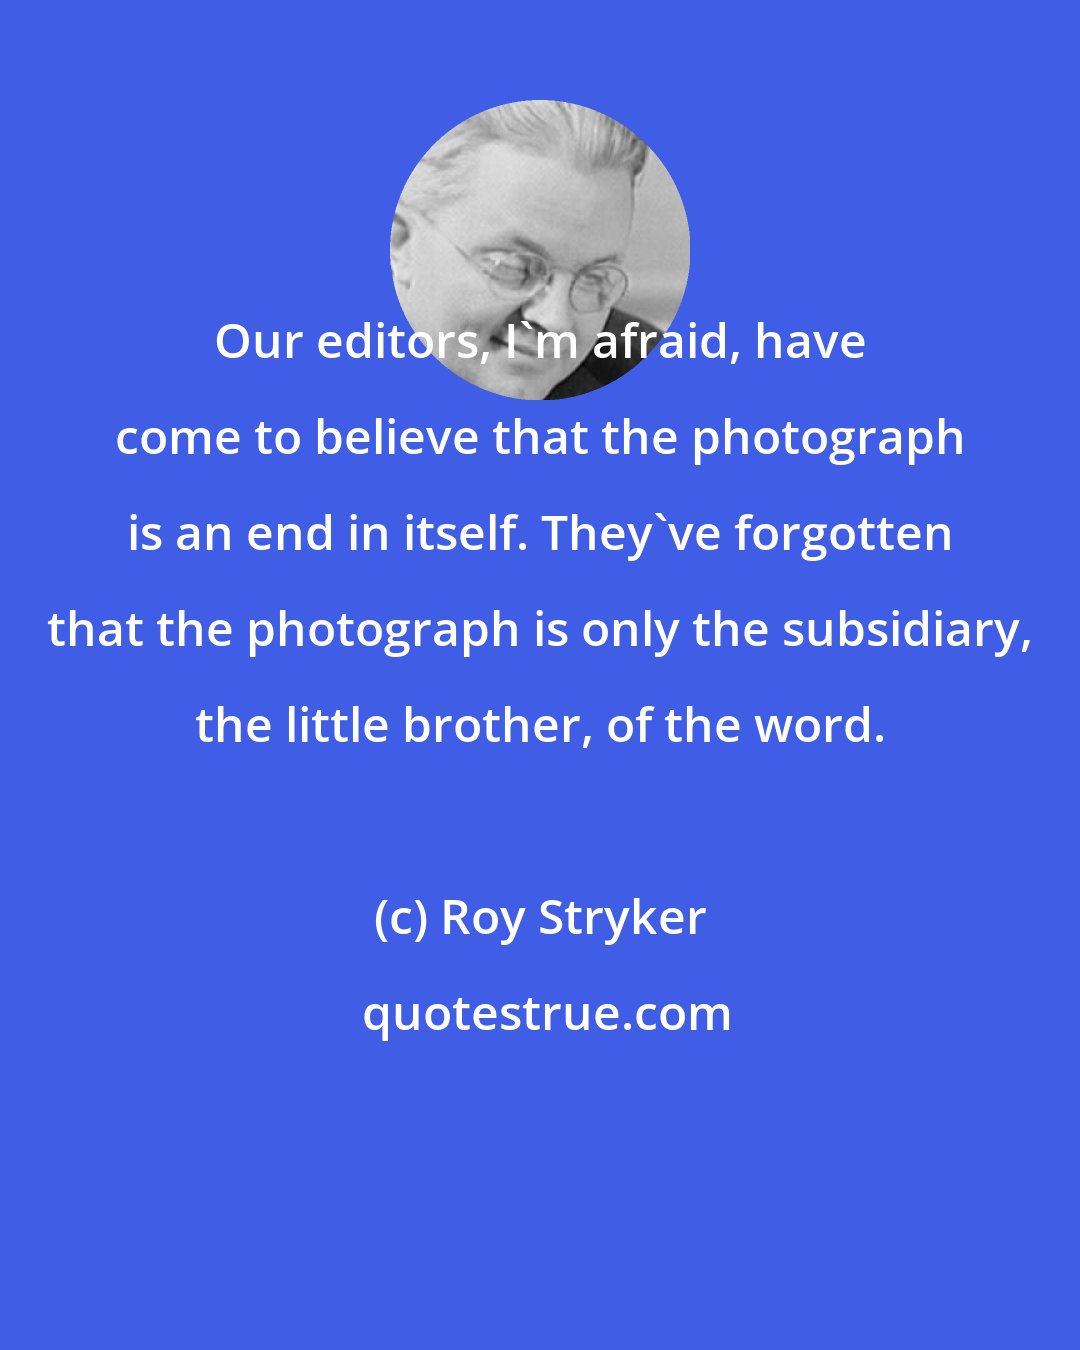 Roy Stryker: Our editors, I'm afraid, have come to believe that the photograph is an end in itself. They've forgotten that the photograph is only the subsidiary, the little brother, of the word.